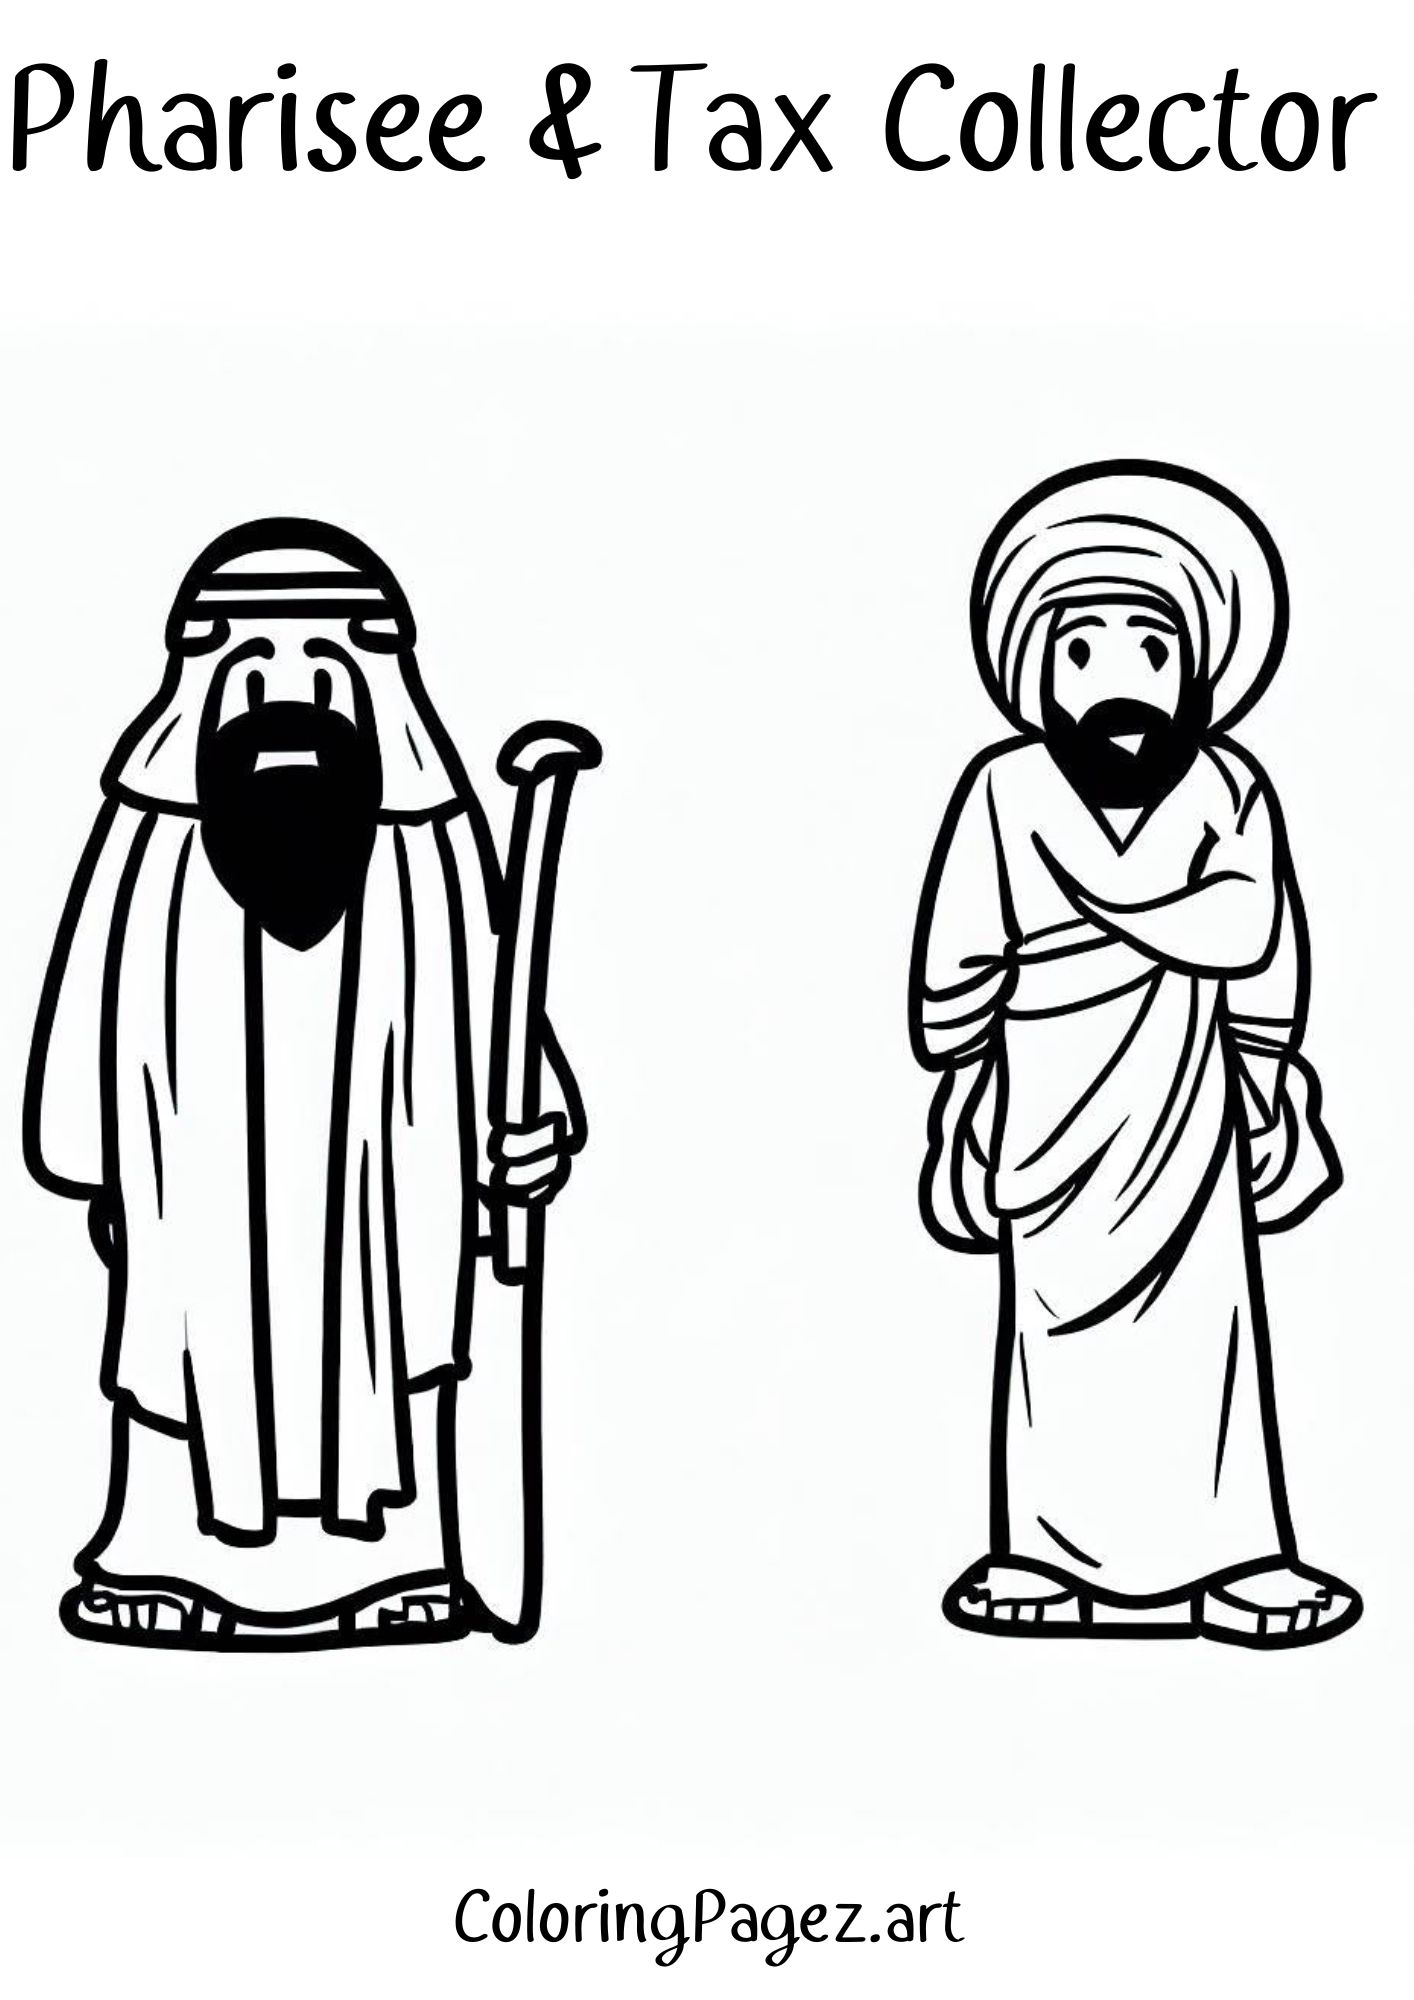 Pharisee and the tax collector coloring page printable